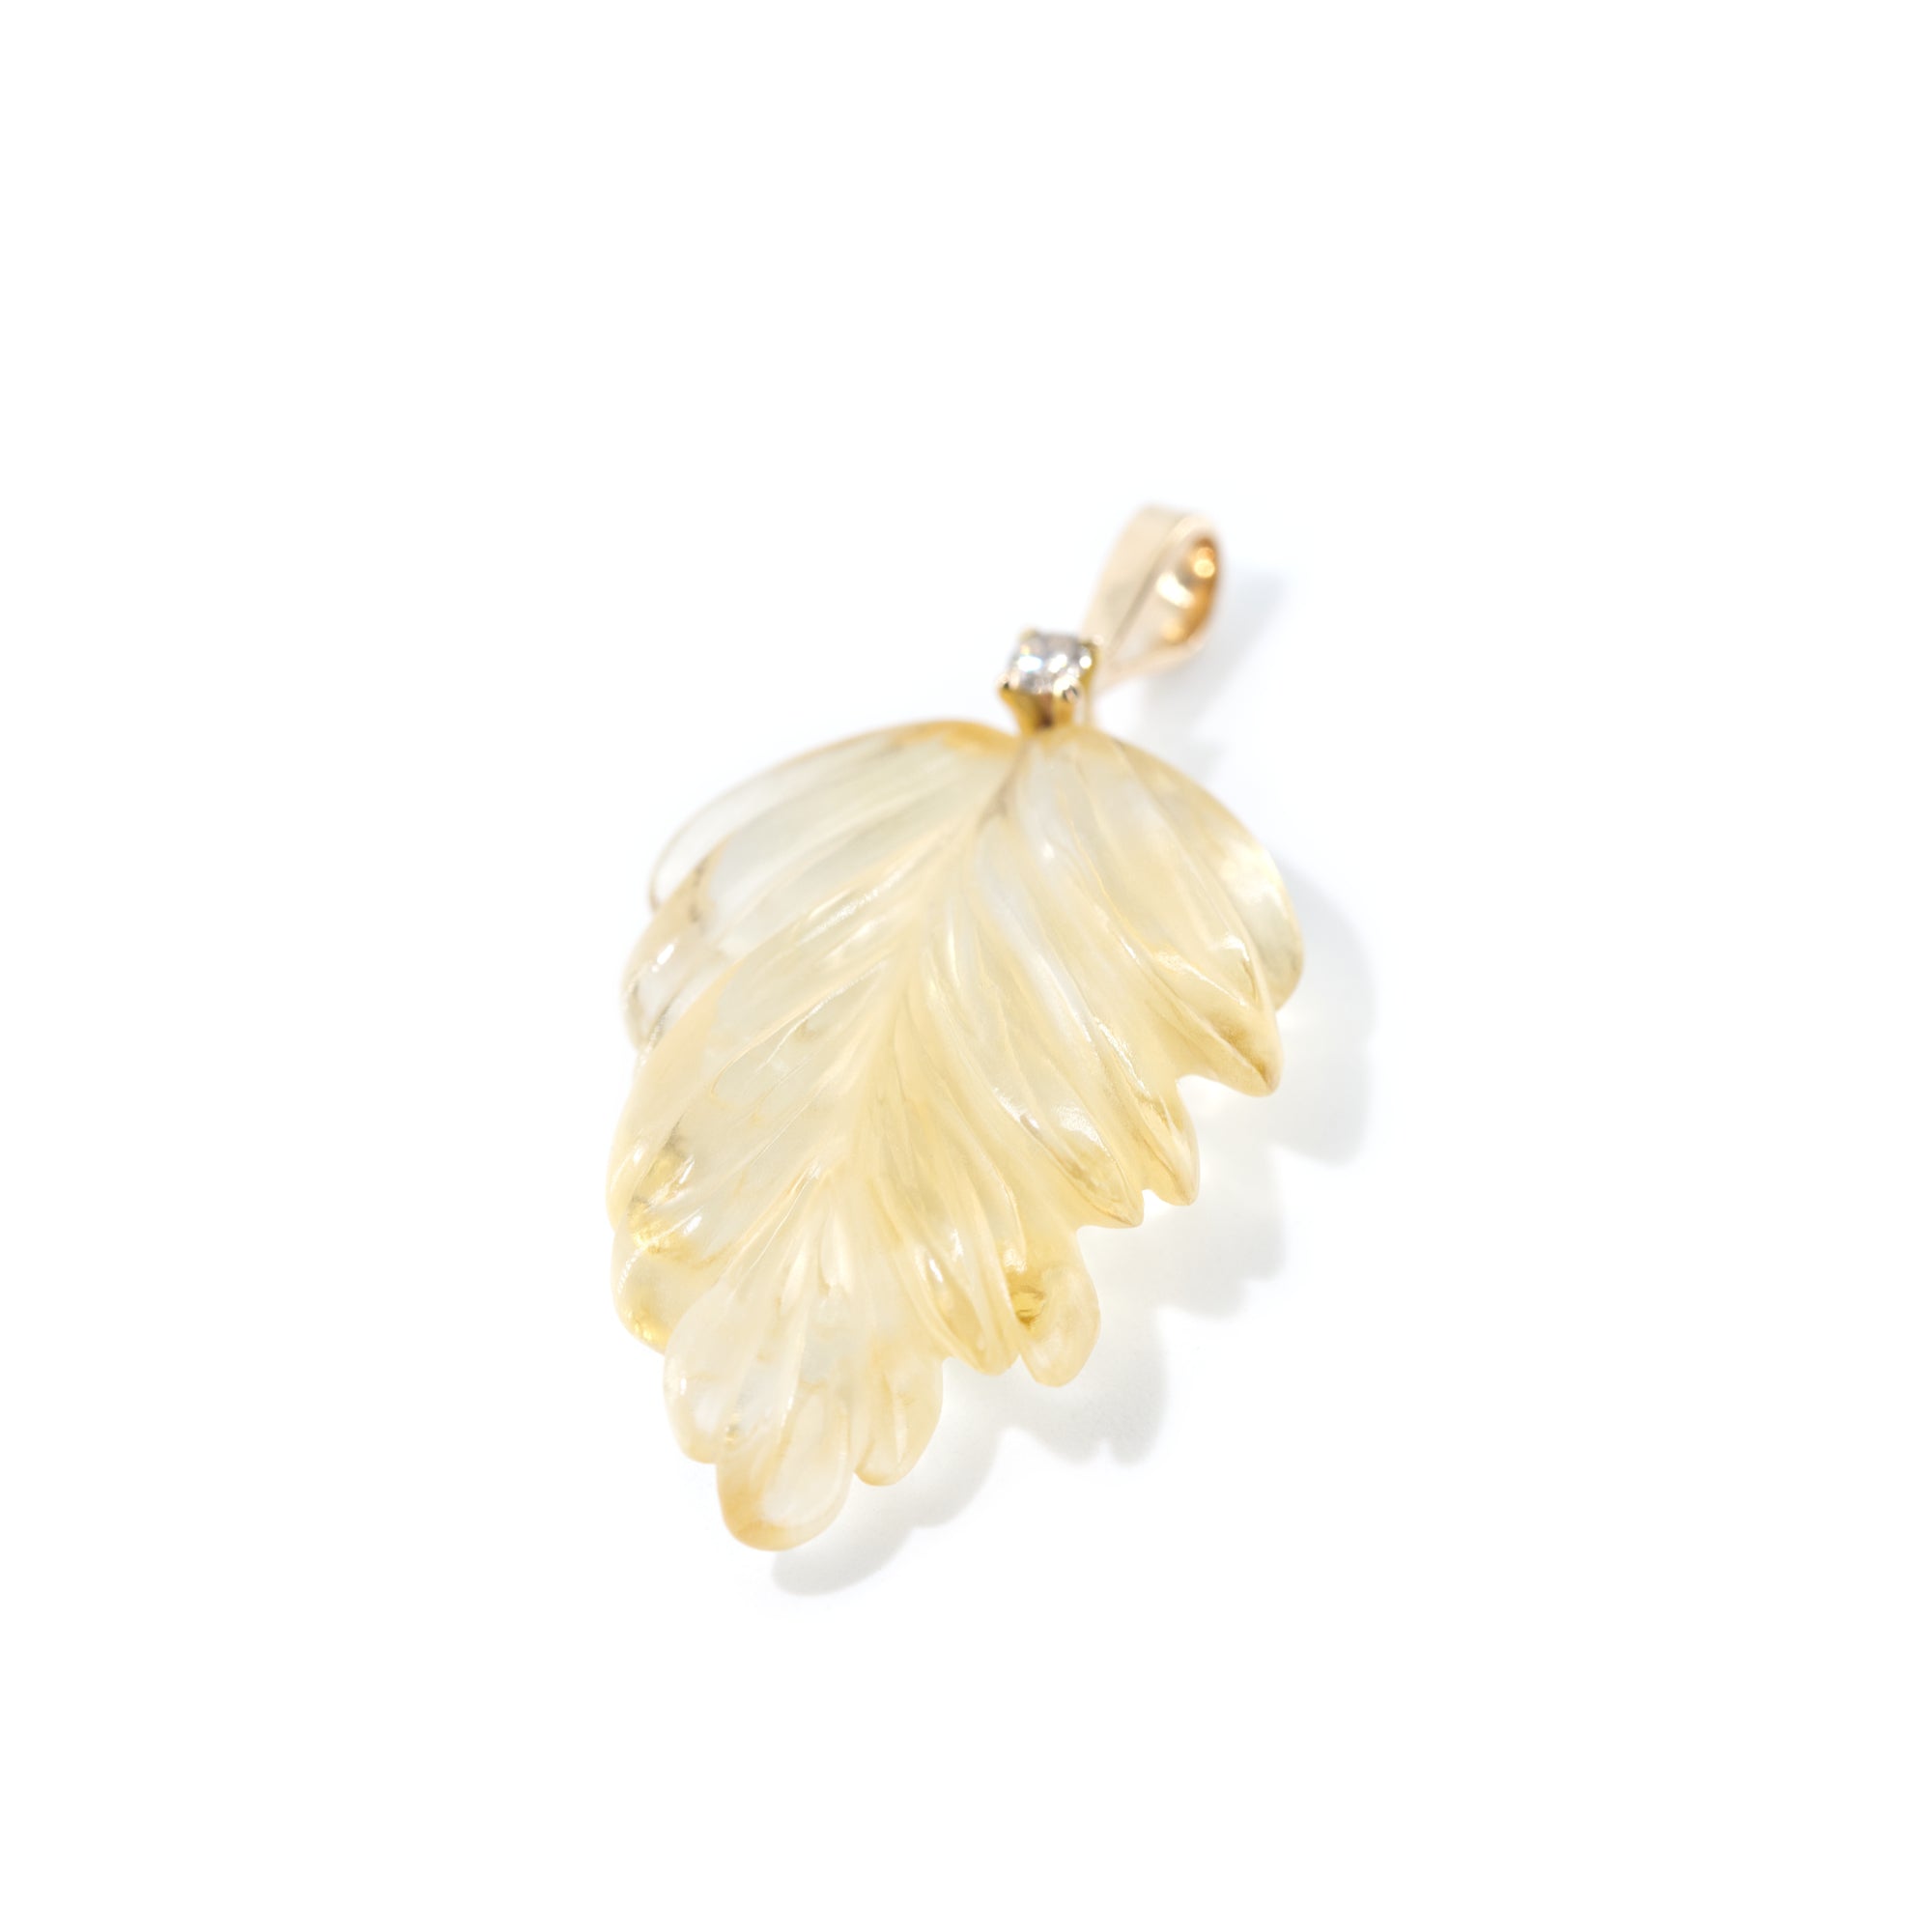 The photo features hand-carved citrine leaf pendant. The pendant is placed vertically  to highlight the detailed work of hand-carving.